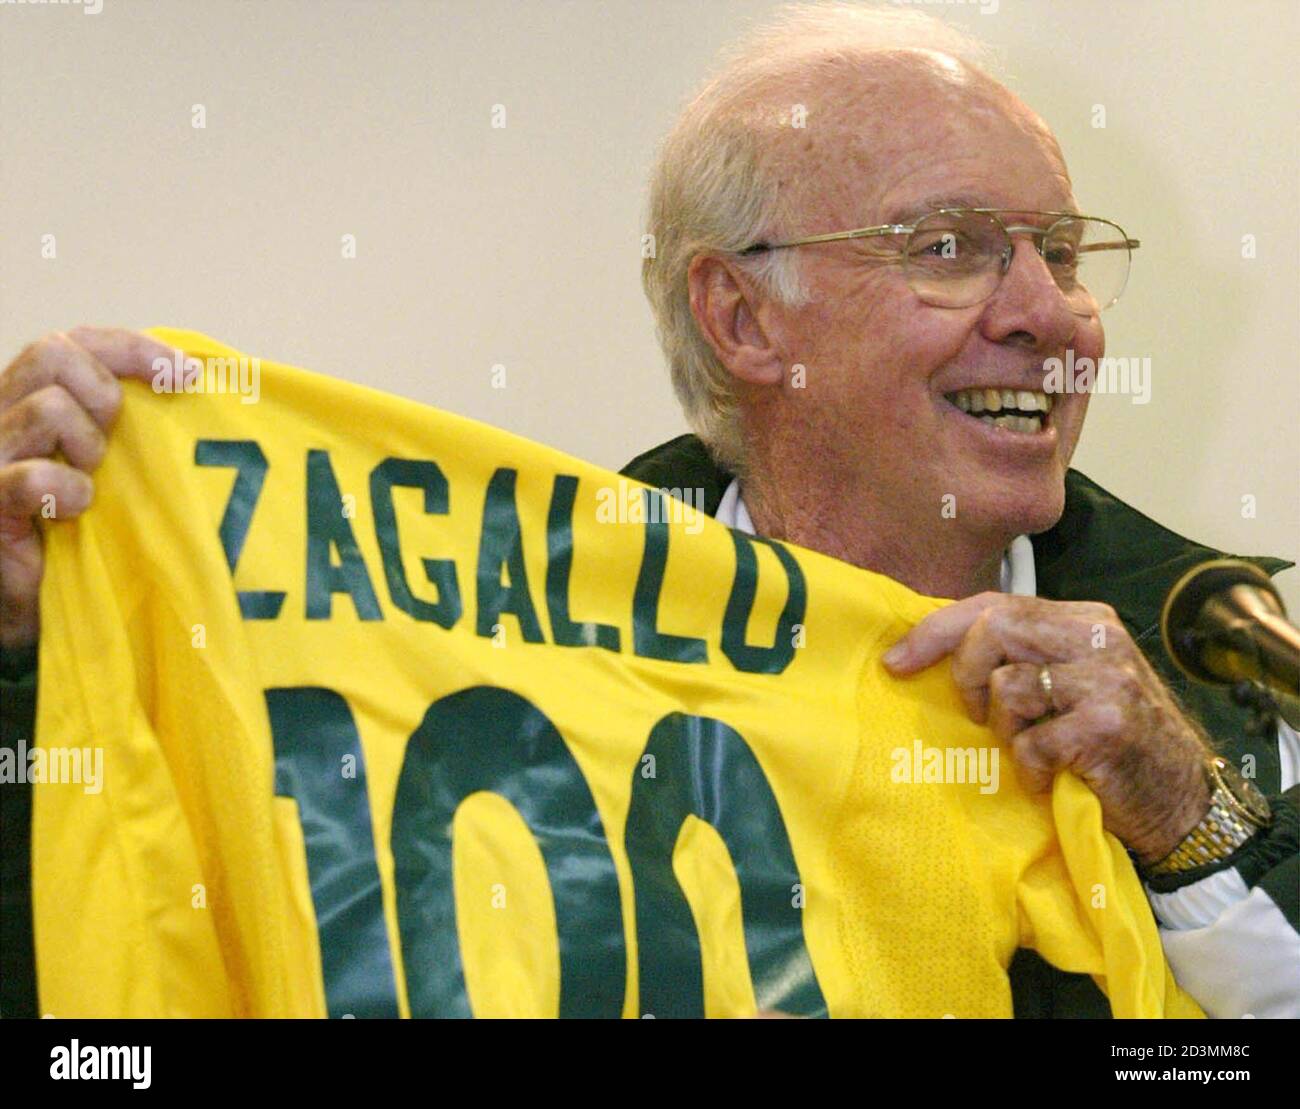 BRAZIL'S HEAD COACH MARIO ZAGALLO HOLDS THE JERSEY SYMBOLIZING HIS 100TH  WINNING AT THE INTERNATIONAL A MATCH IN SEOUL Stock Photo - Alamy